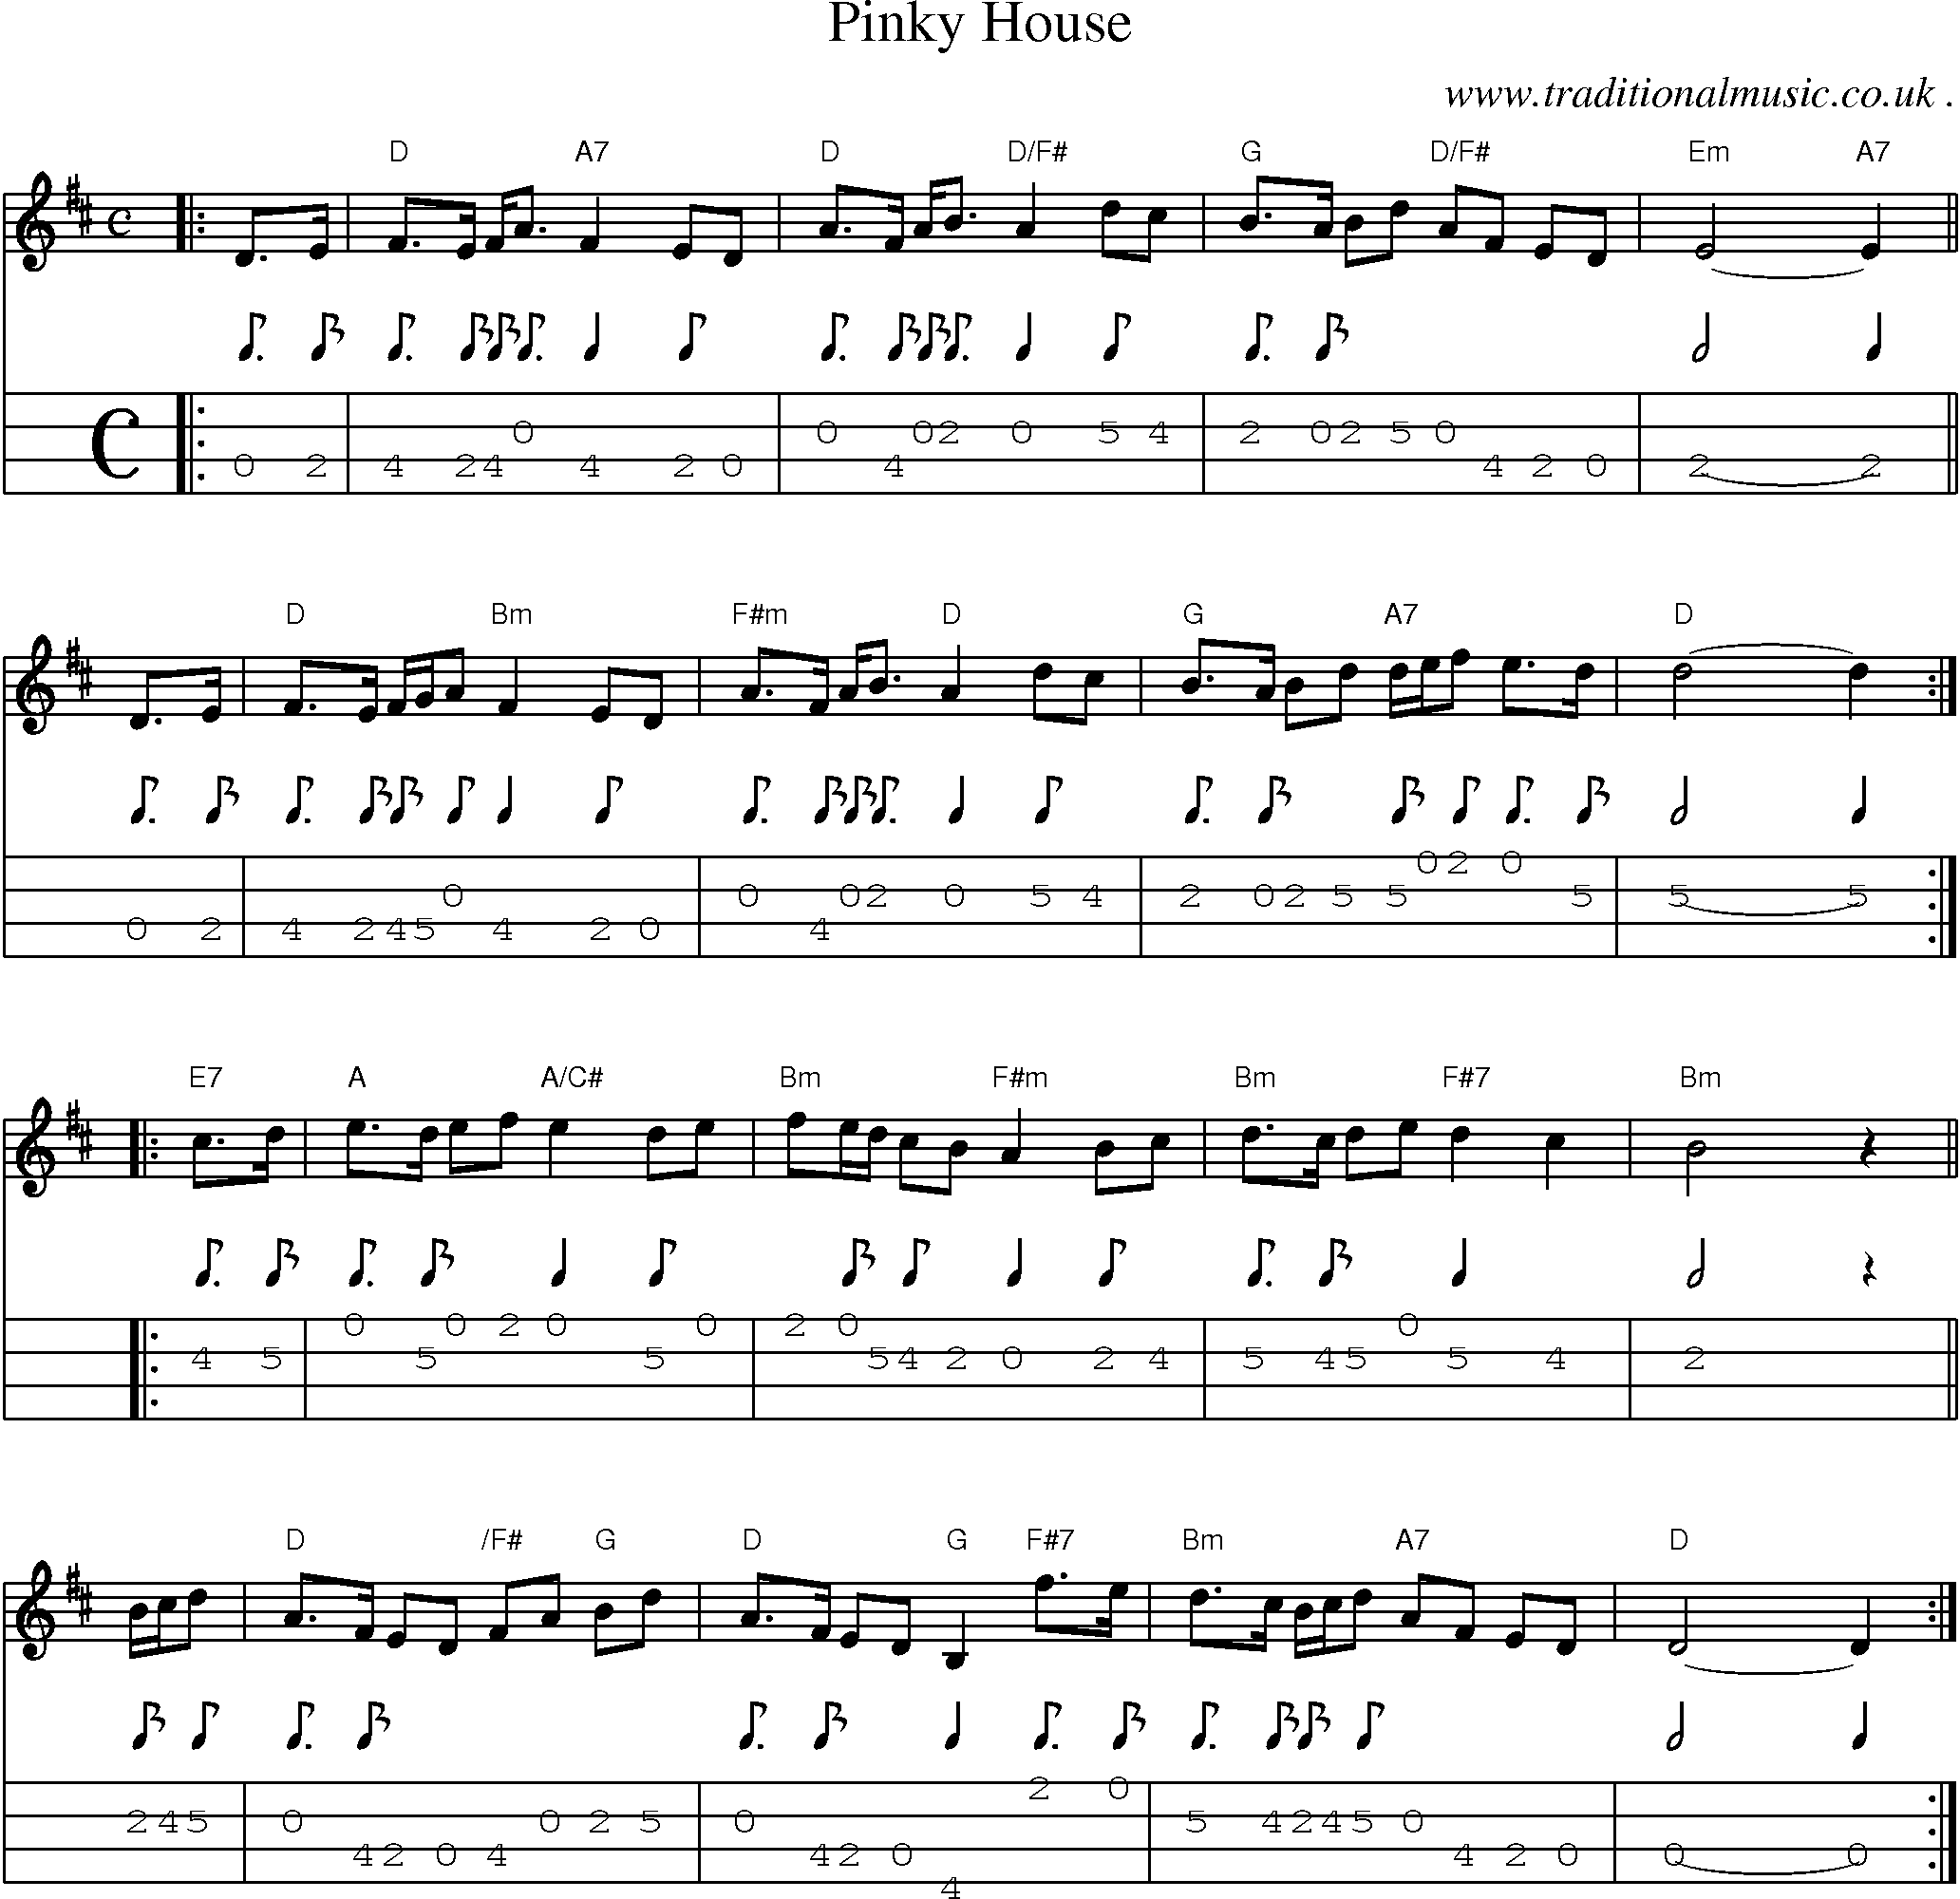 Sheet-music  score, Chords and Mandolin Tabs for Pinky House